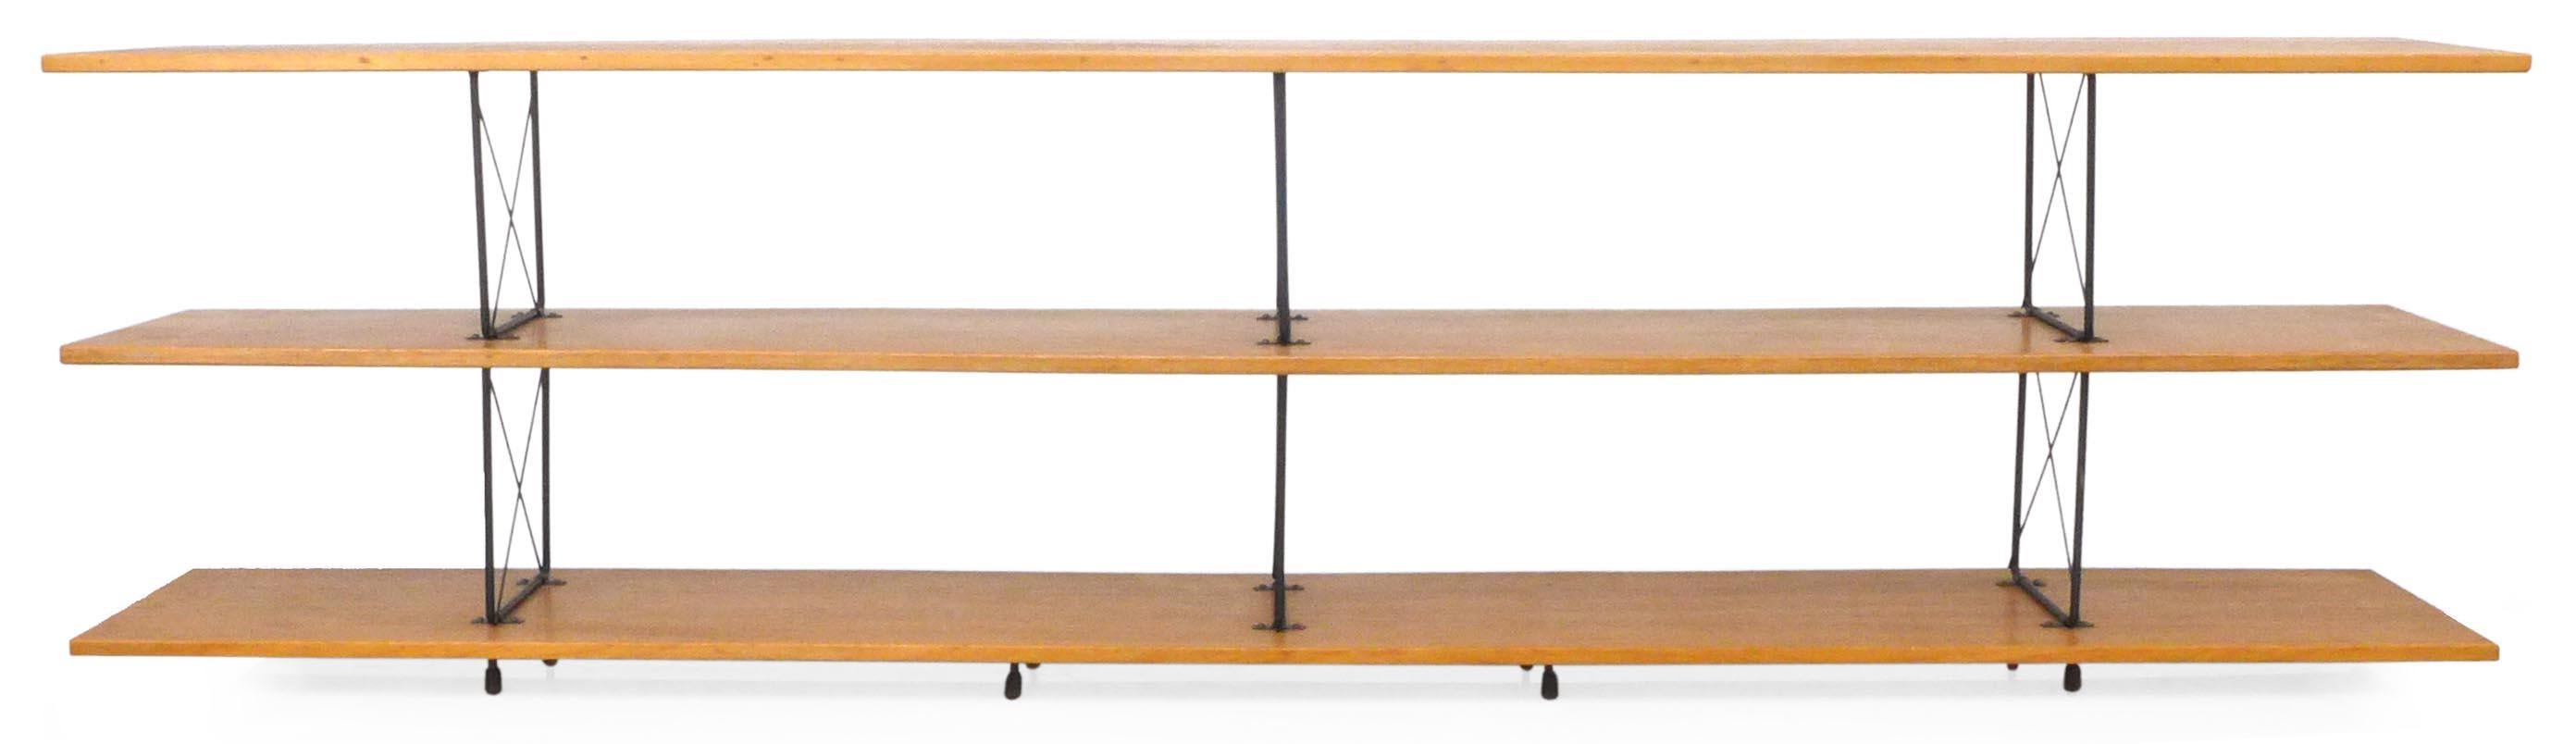 A wonderful, American midcentury shelving unit in wood and iron. Assembled from a kit of D.I.Y. X-brace hardware and beautiful, mitered-edge, solid wood planks, a clearly Eames/McCobb inspired design quite well assembled. Retains original